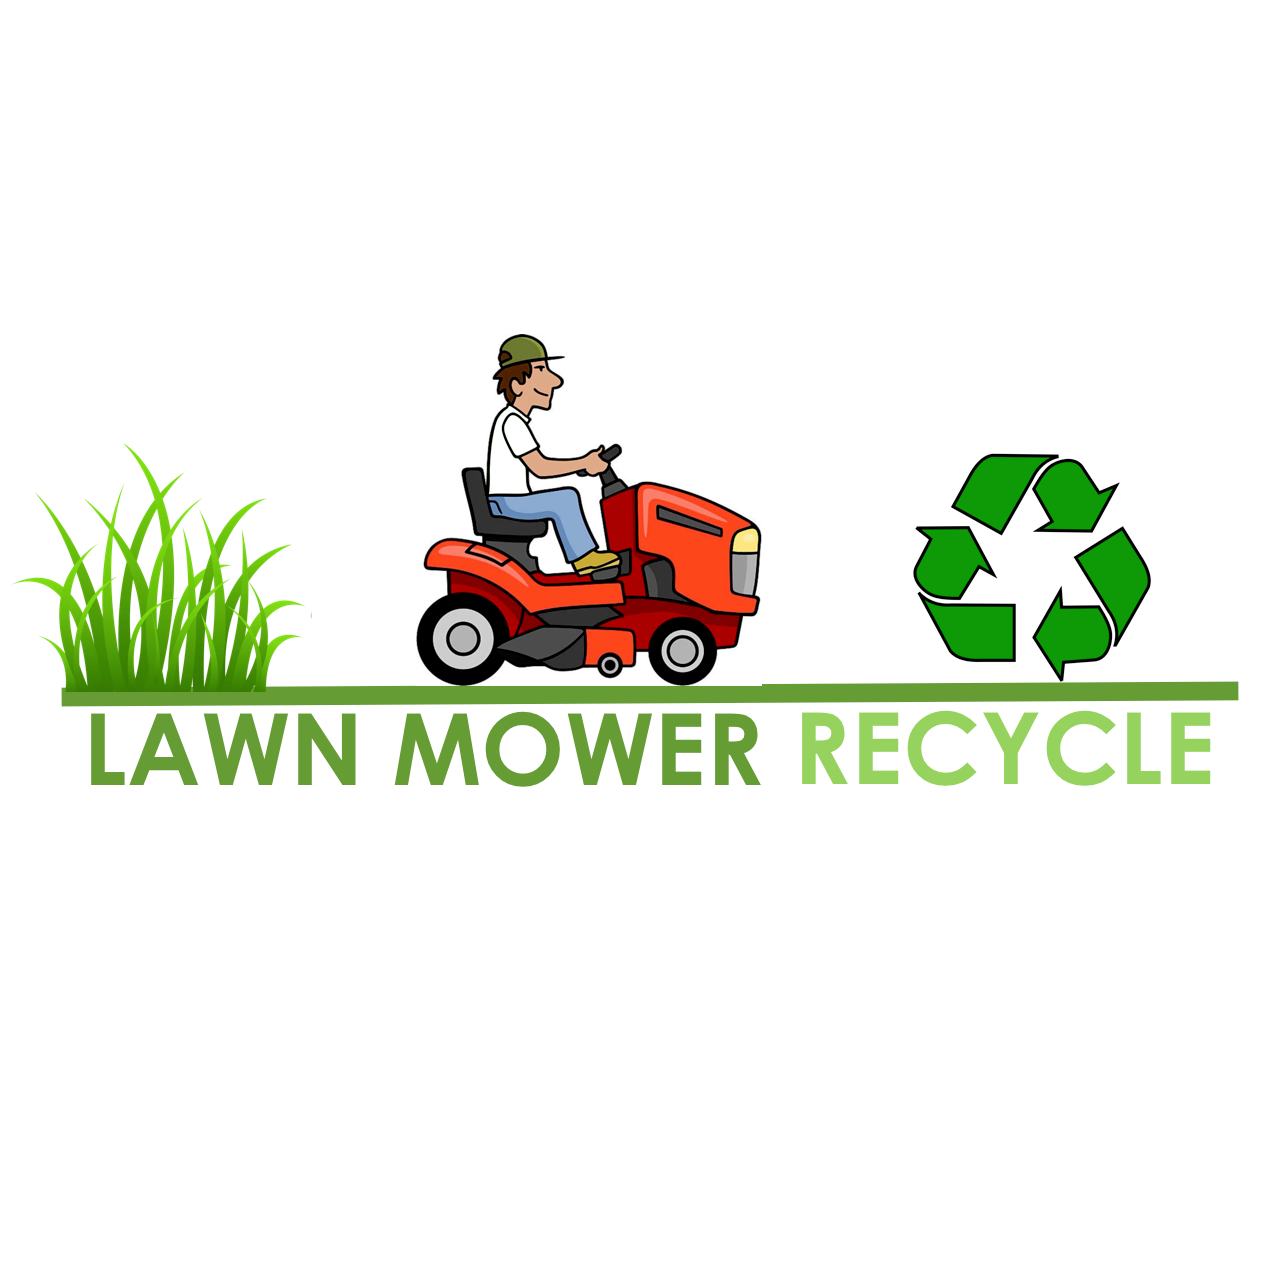 Lawn Mower Recycle Logo Lawn Mower Recycle LLC Indianapolis (317)763-2032